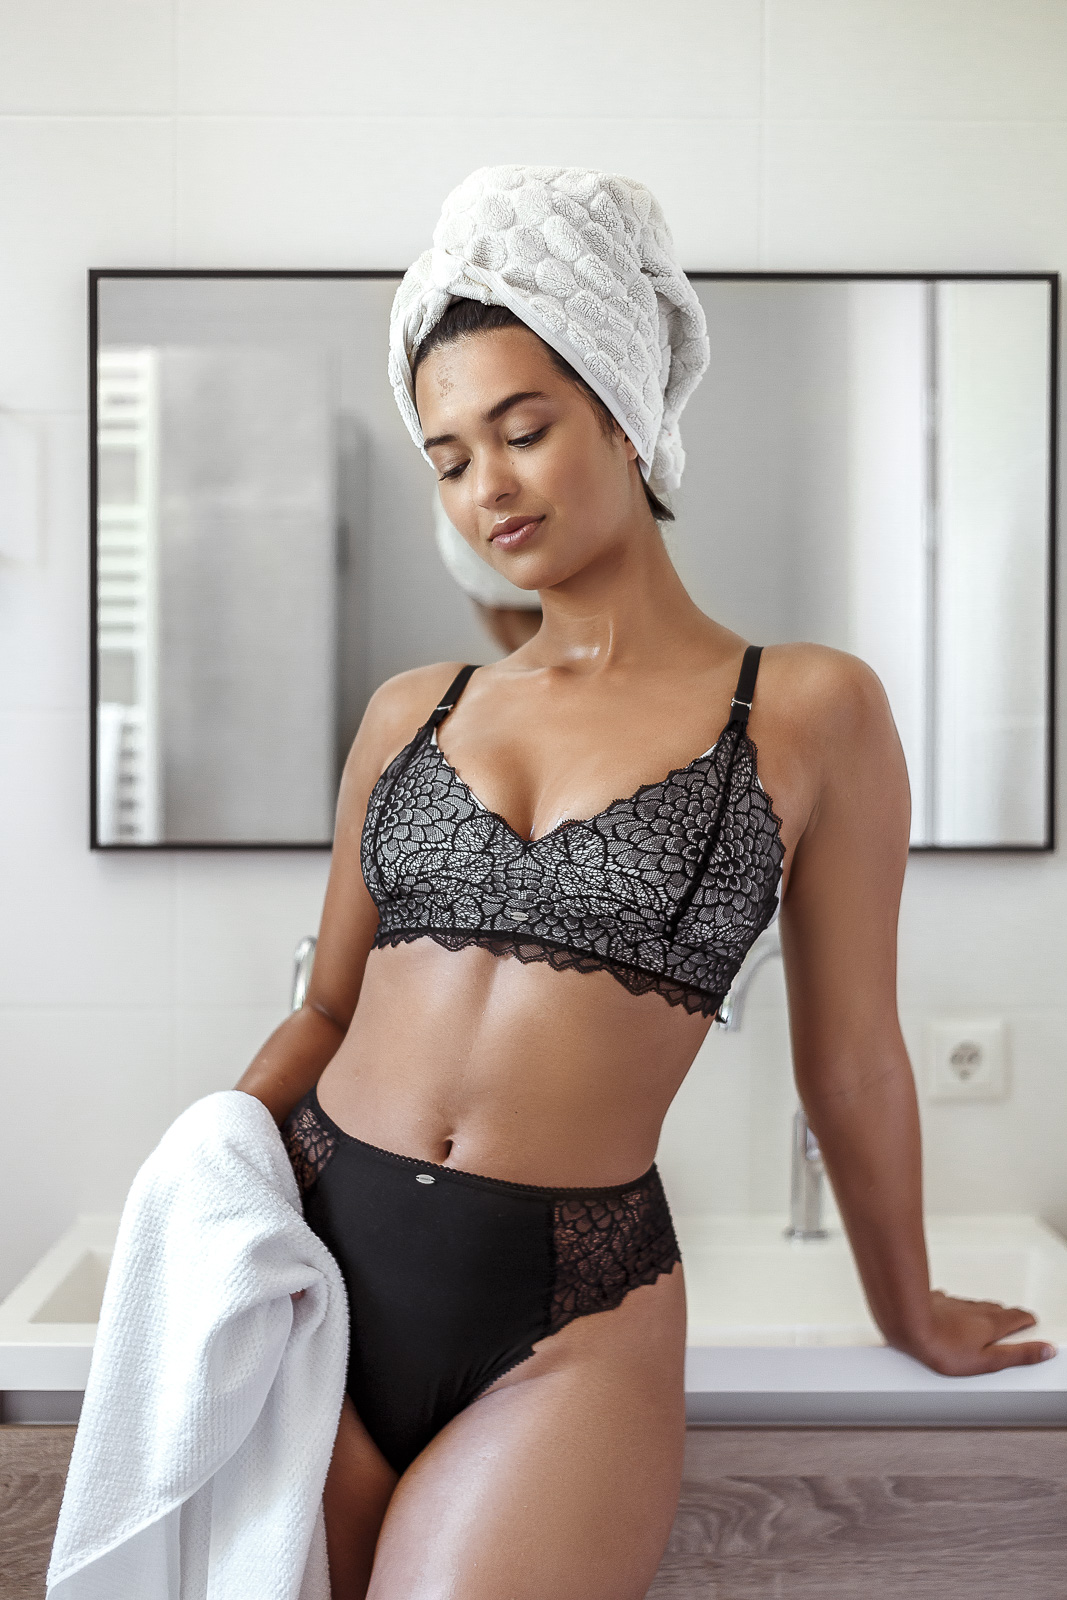 Lingerie Photography on location in Norway and The Netherlands – Portrait, beauty, fashion, lookbook and product photography and film by Stephanie Verhart